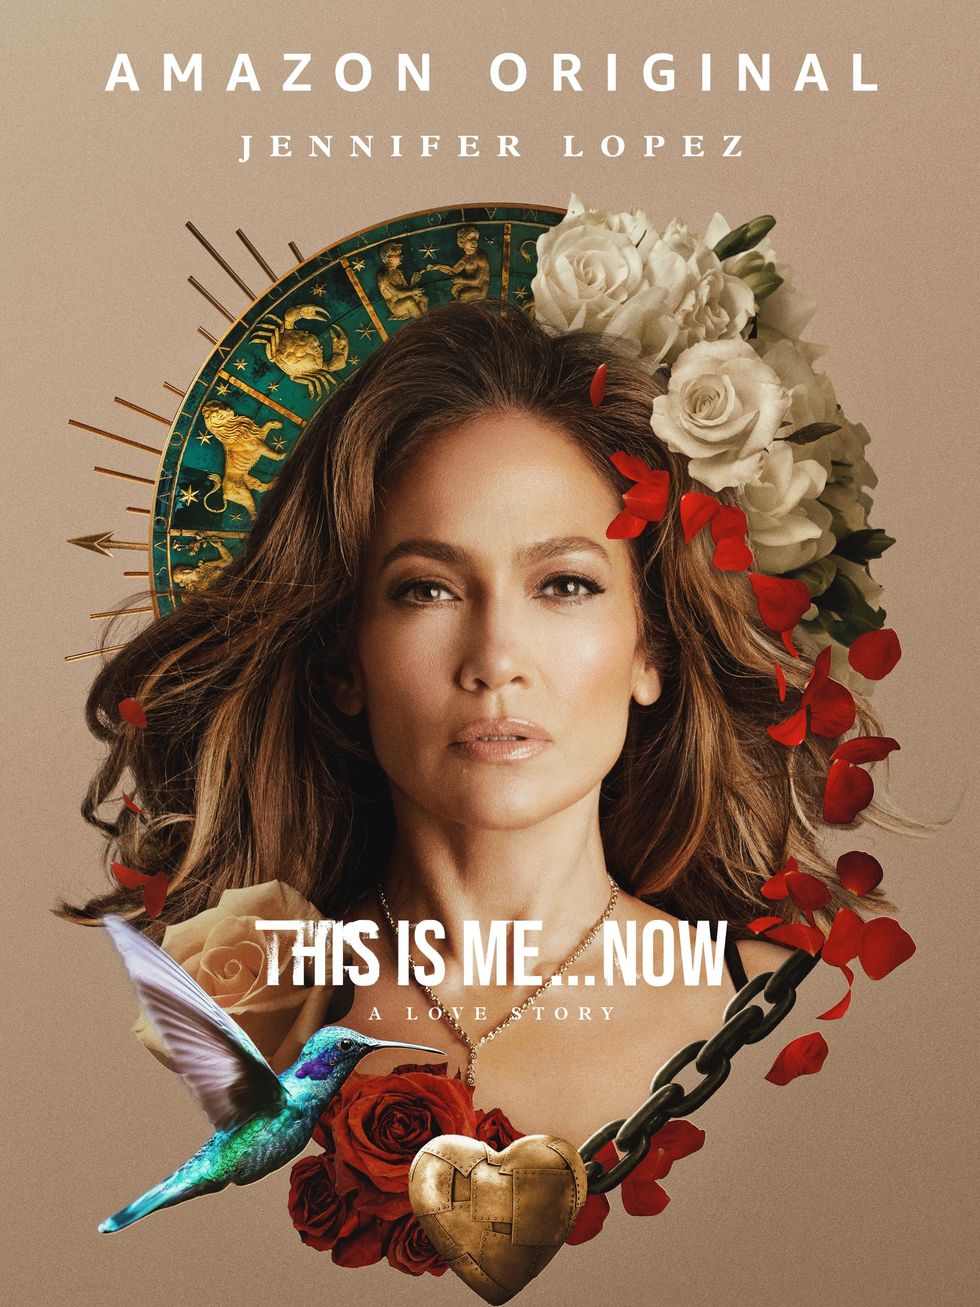 How to watch Jennifer Lopez's This Is Me…Now: A Love Story in the UK